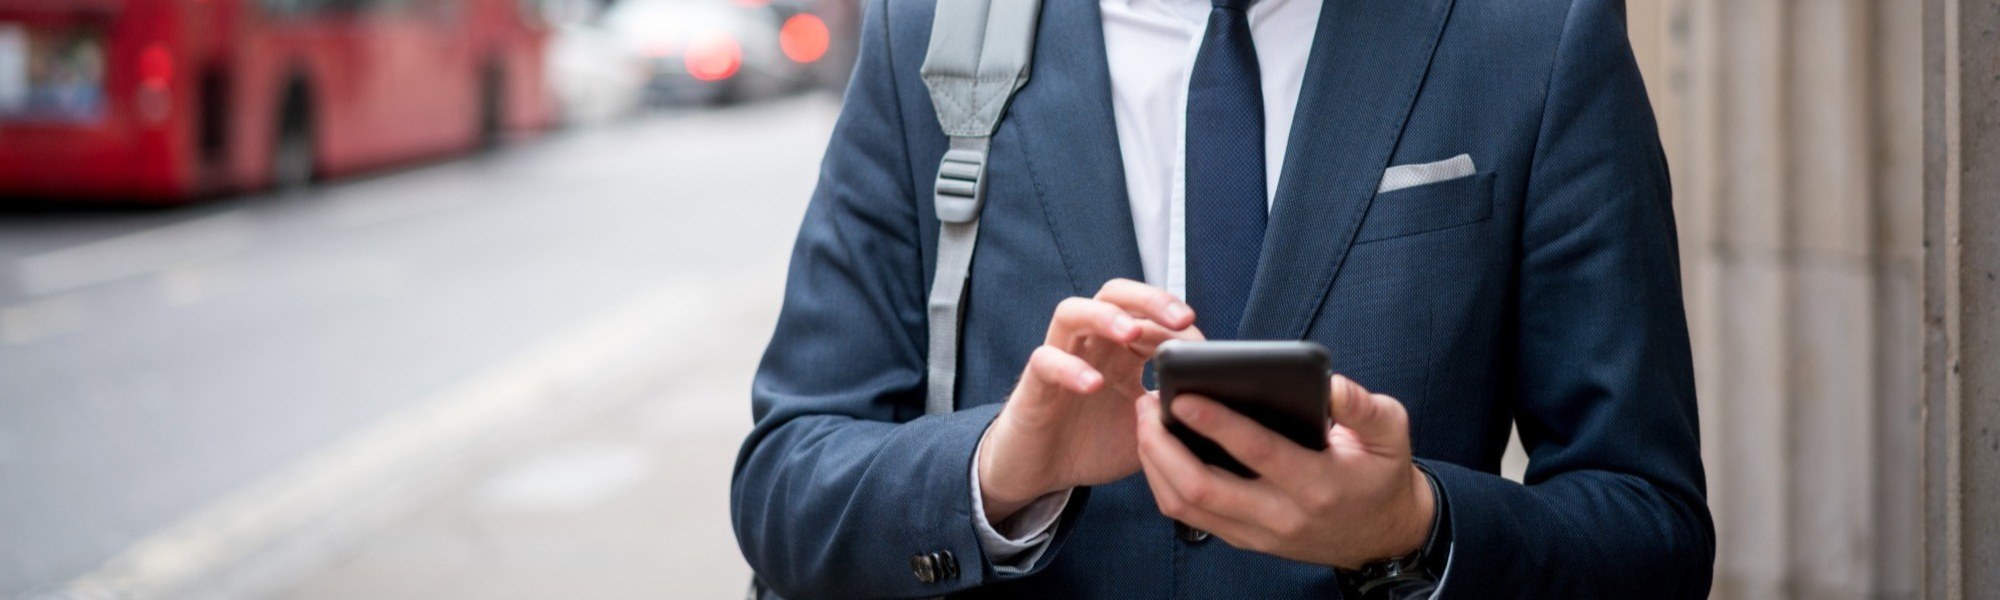 Young business man in suit texting on the street looking at phone